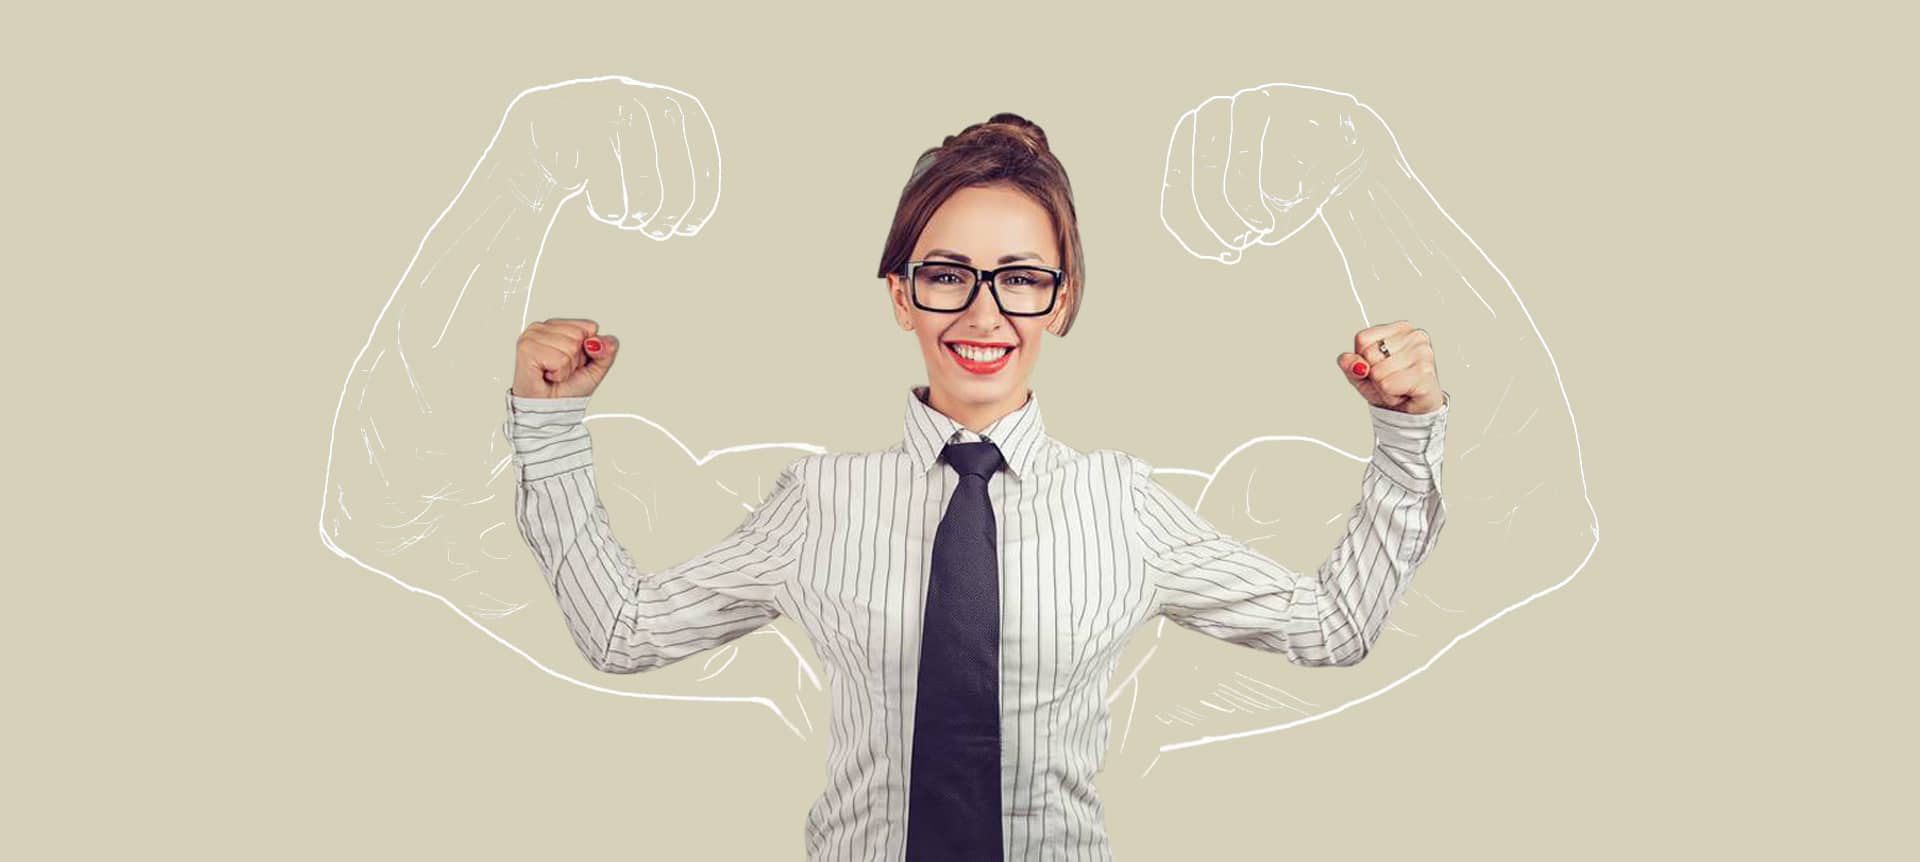 A female recruiter wearing a tie, glasses, and lifting her arms up, ready to boost the hiring hit-rate for video assessments.